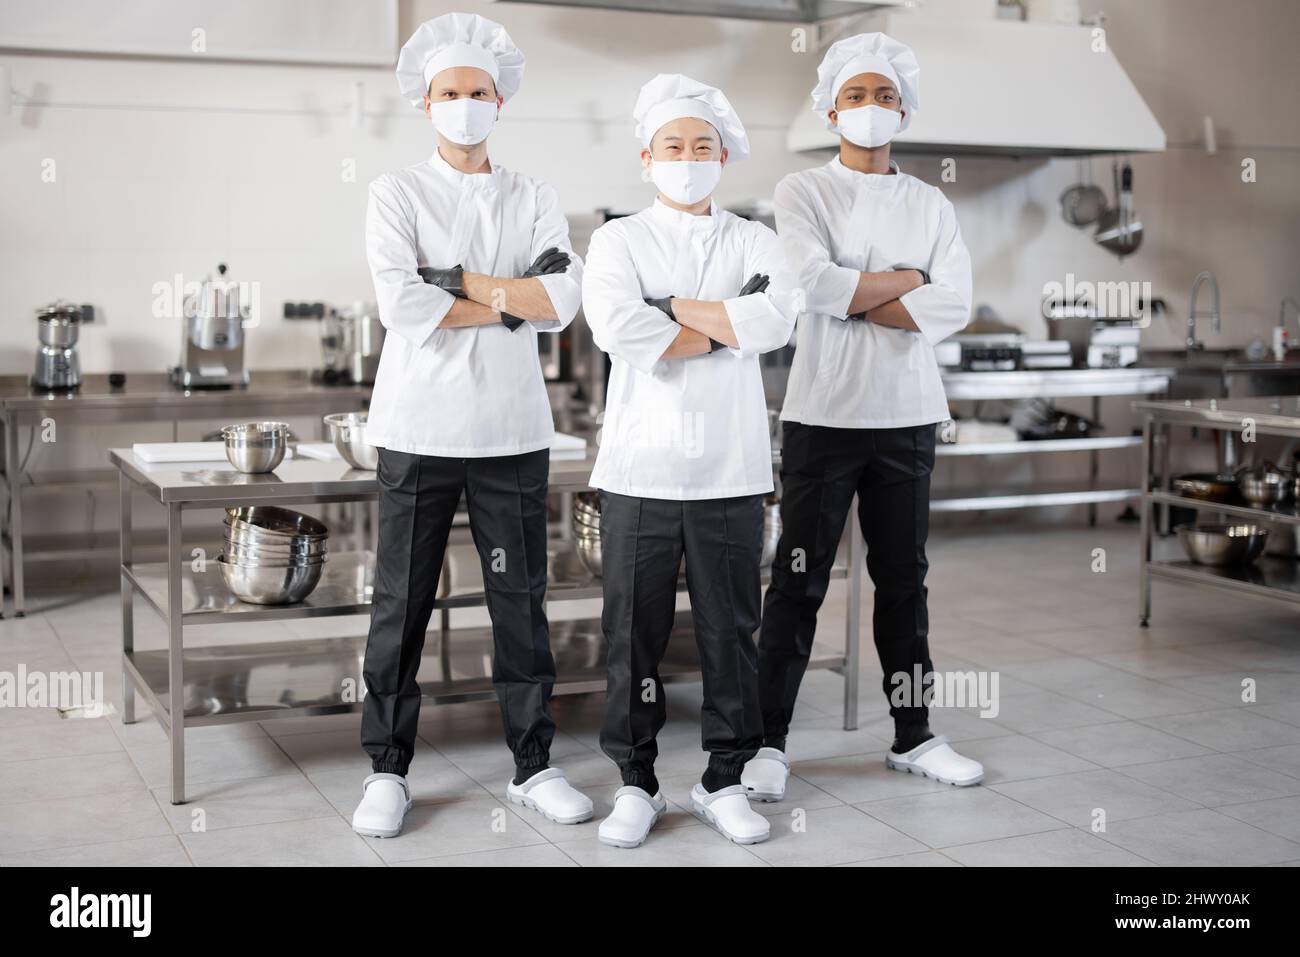 https://c8.alamy.com/comp/2HWY0AK/full-body-portrait-of-multiracial-team-of-three-chefs-standing-together-in-the-professional-kitchen-well-dressed-chefs-in-face-masks-and-protective-gloves-ready-for-a-job-new-normal-for-business-during-pandemic-2HWY0AK.jpg